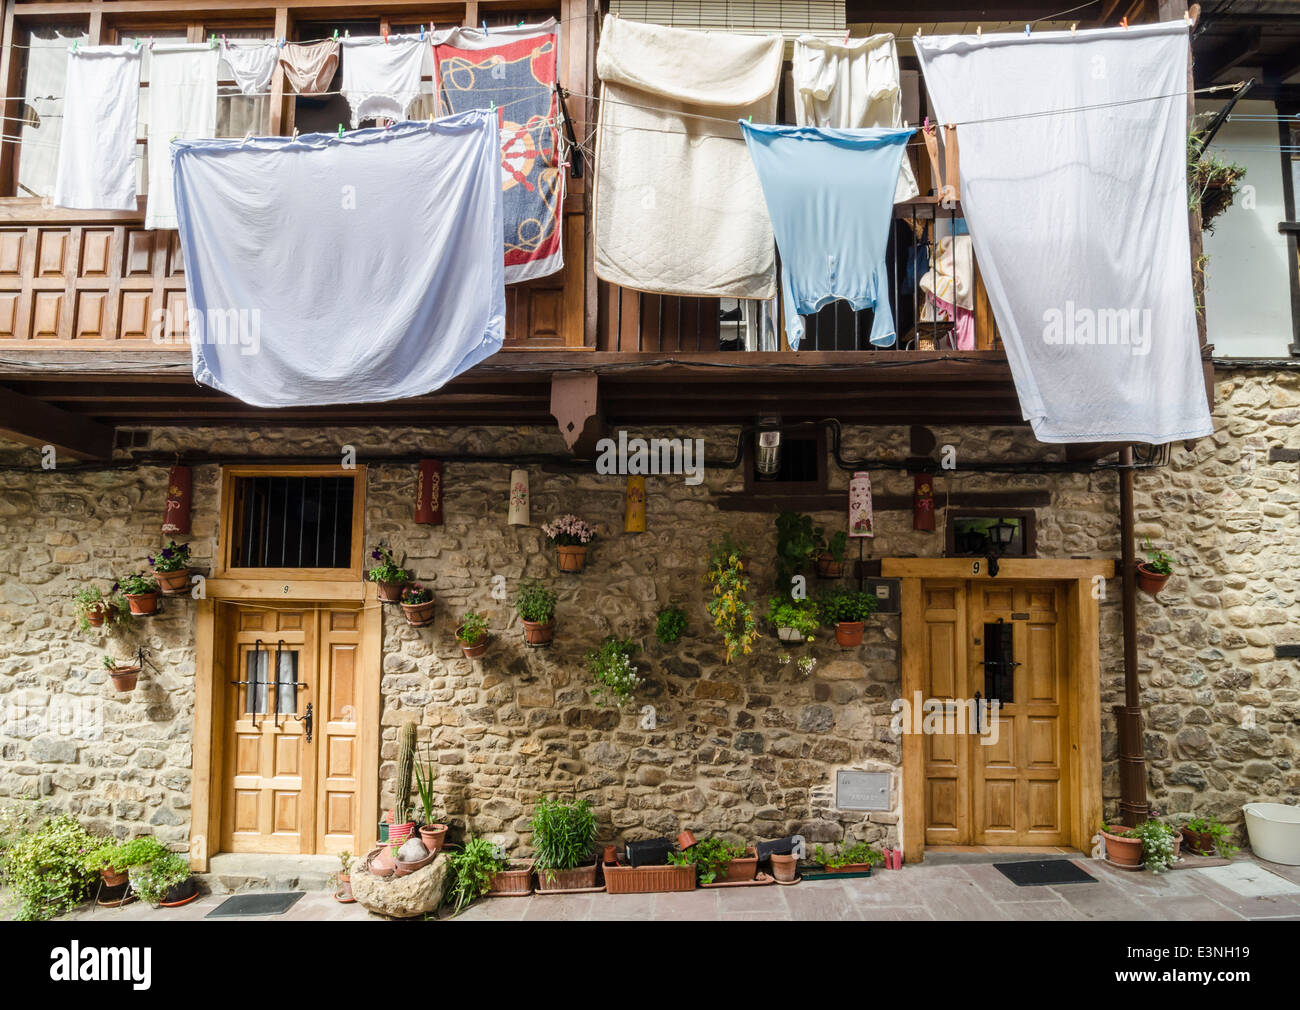 Washing hung out to dry on a line outside a traditional stone house in Potes, Cantabria, Spain Stock Photo